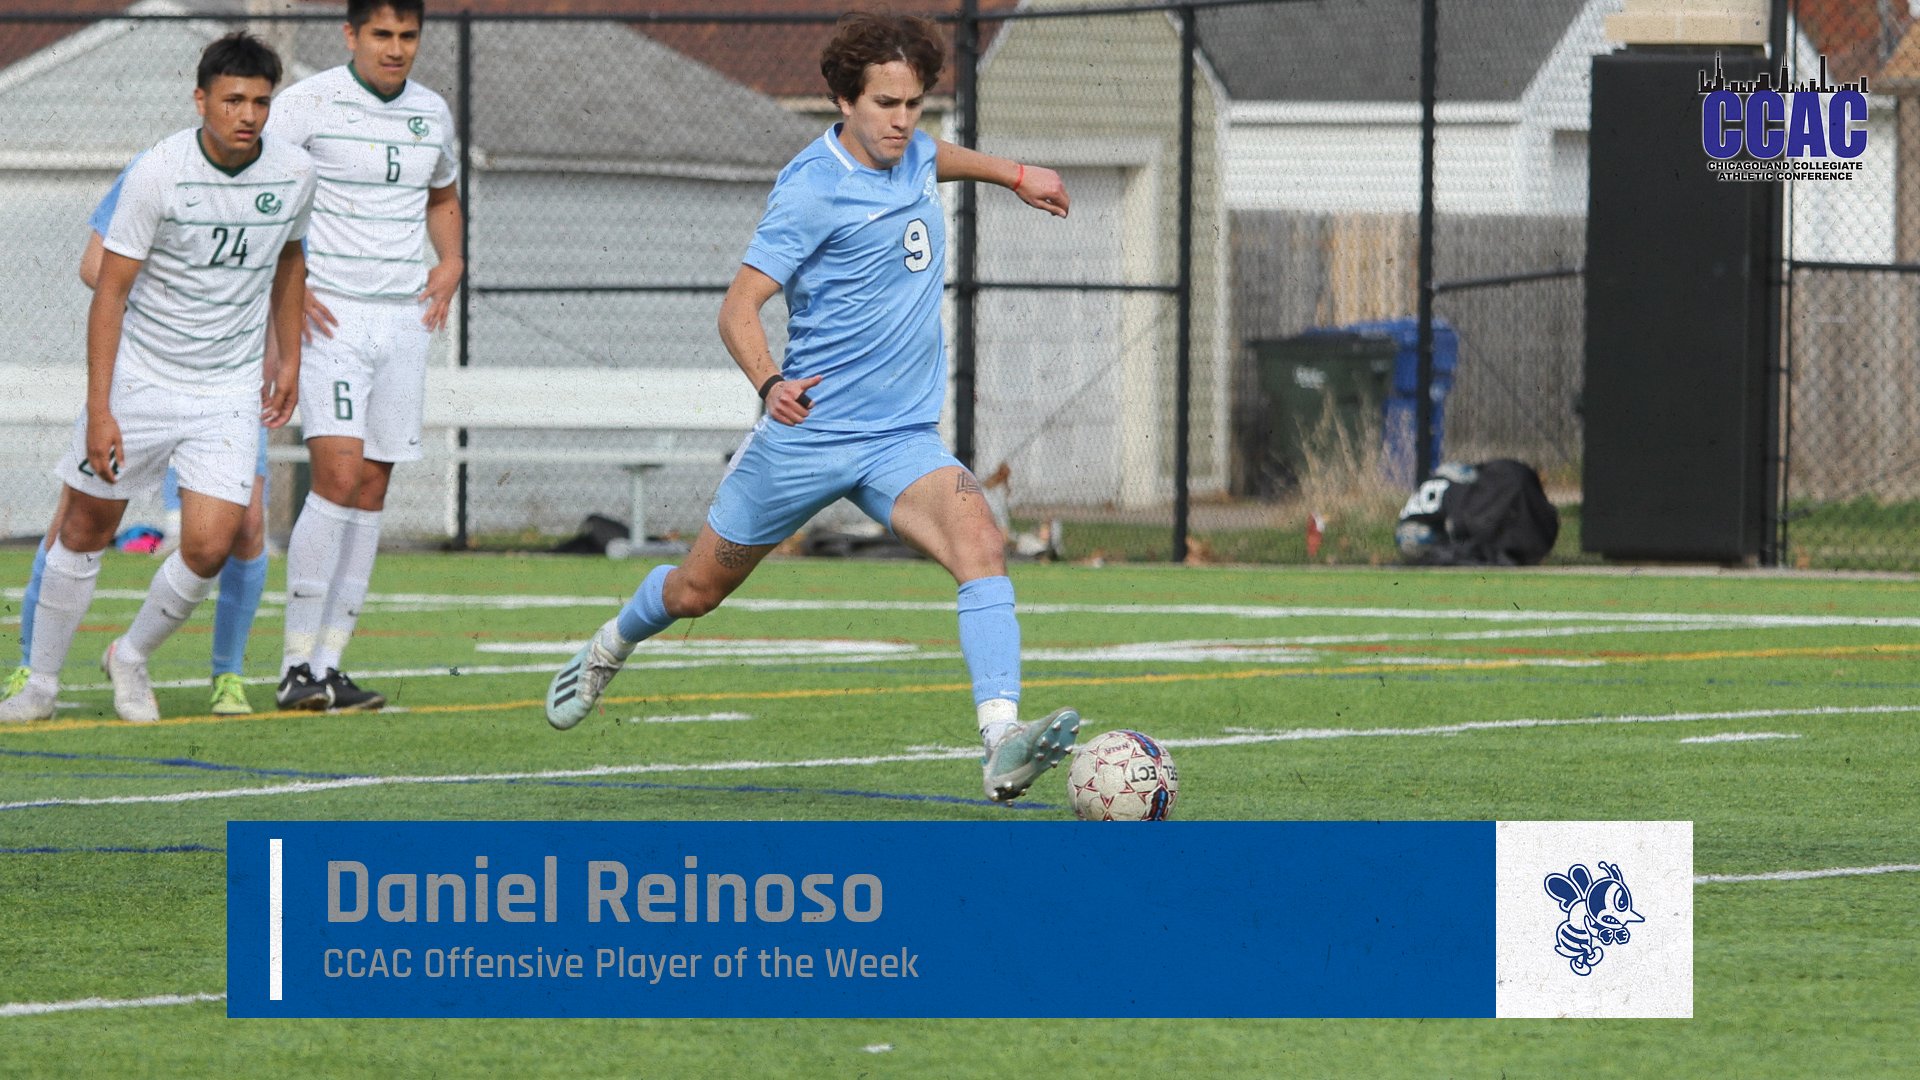 Reinoso earns CCAC Offensive Player of the Week honors